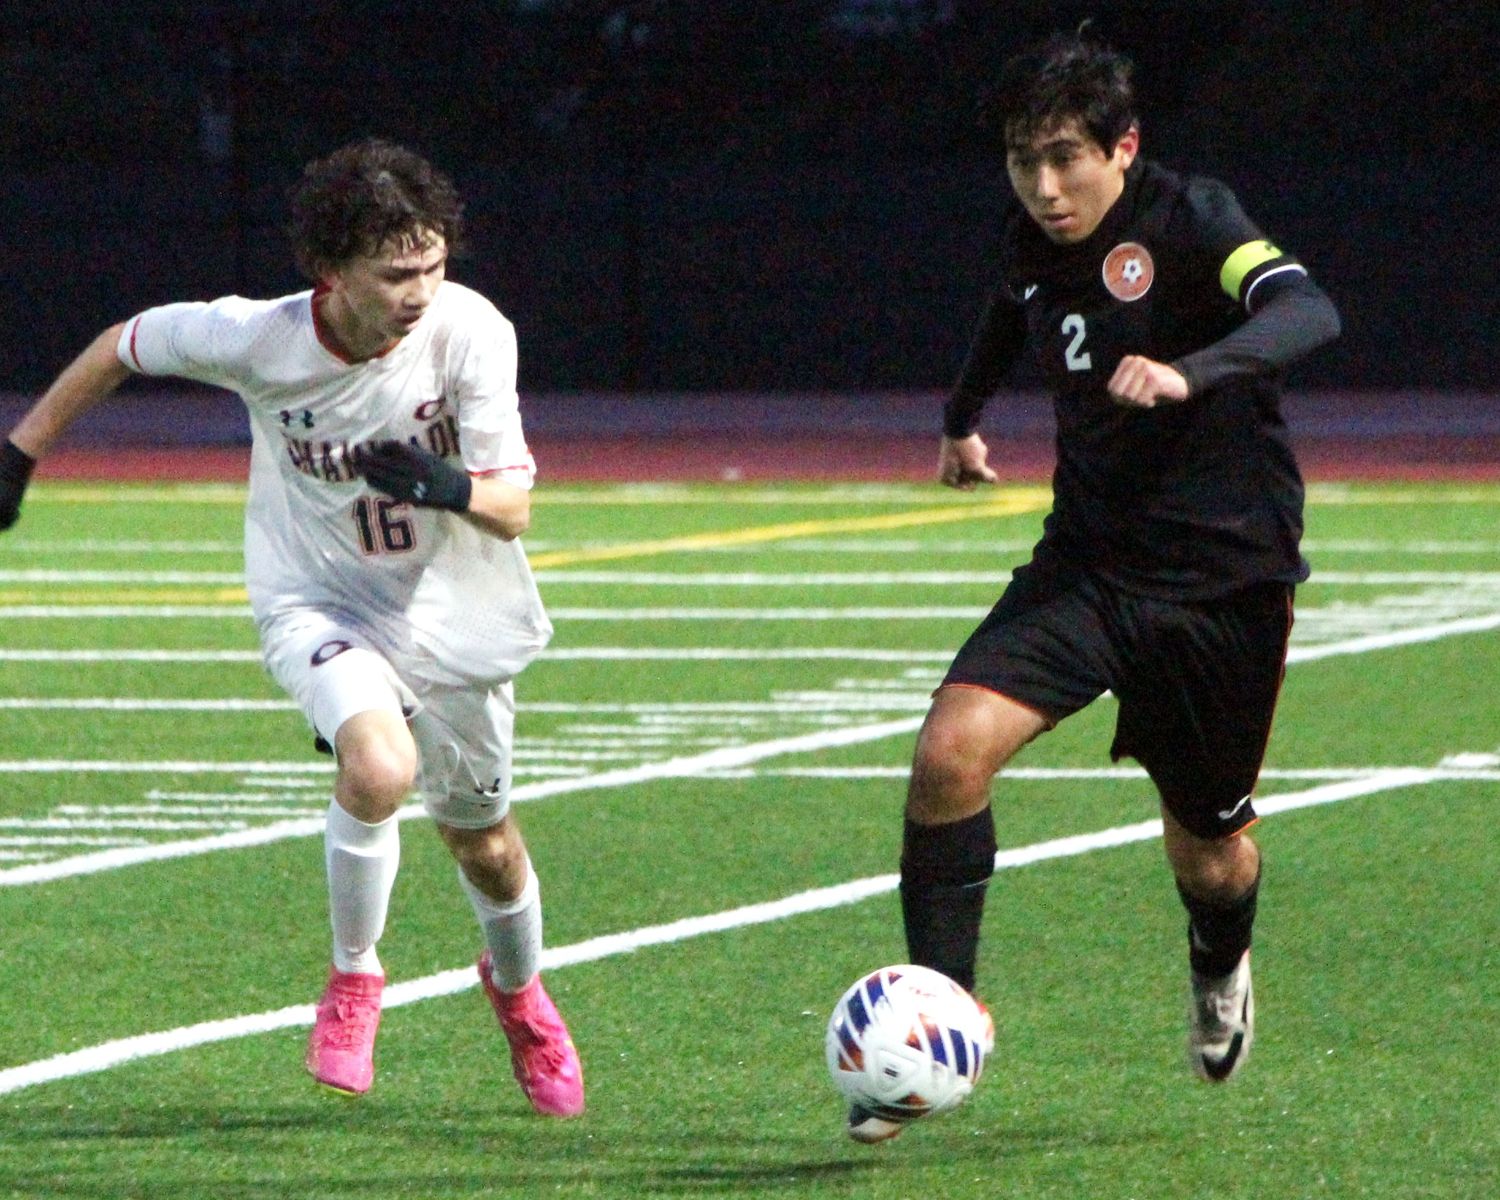 PHOTO: Henk Friezer | The South Pasadenan | South Pasadena High fell to Chaminade 2-1 in a CIF Division 3 wildcard double overtime loss at home on Tuesday.